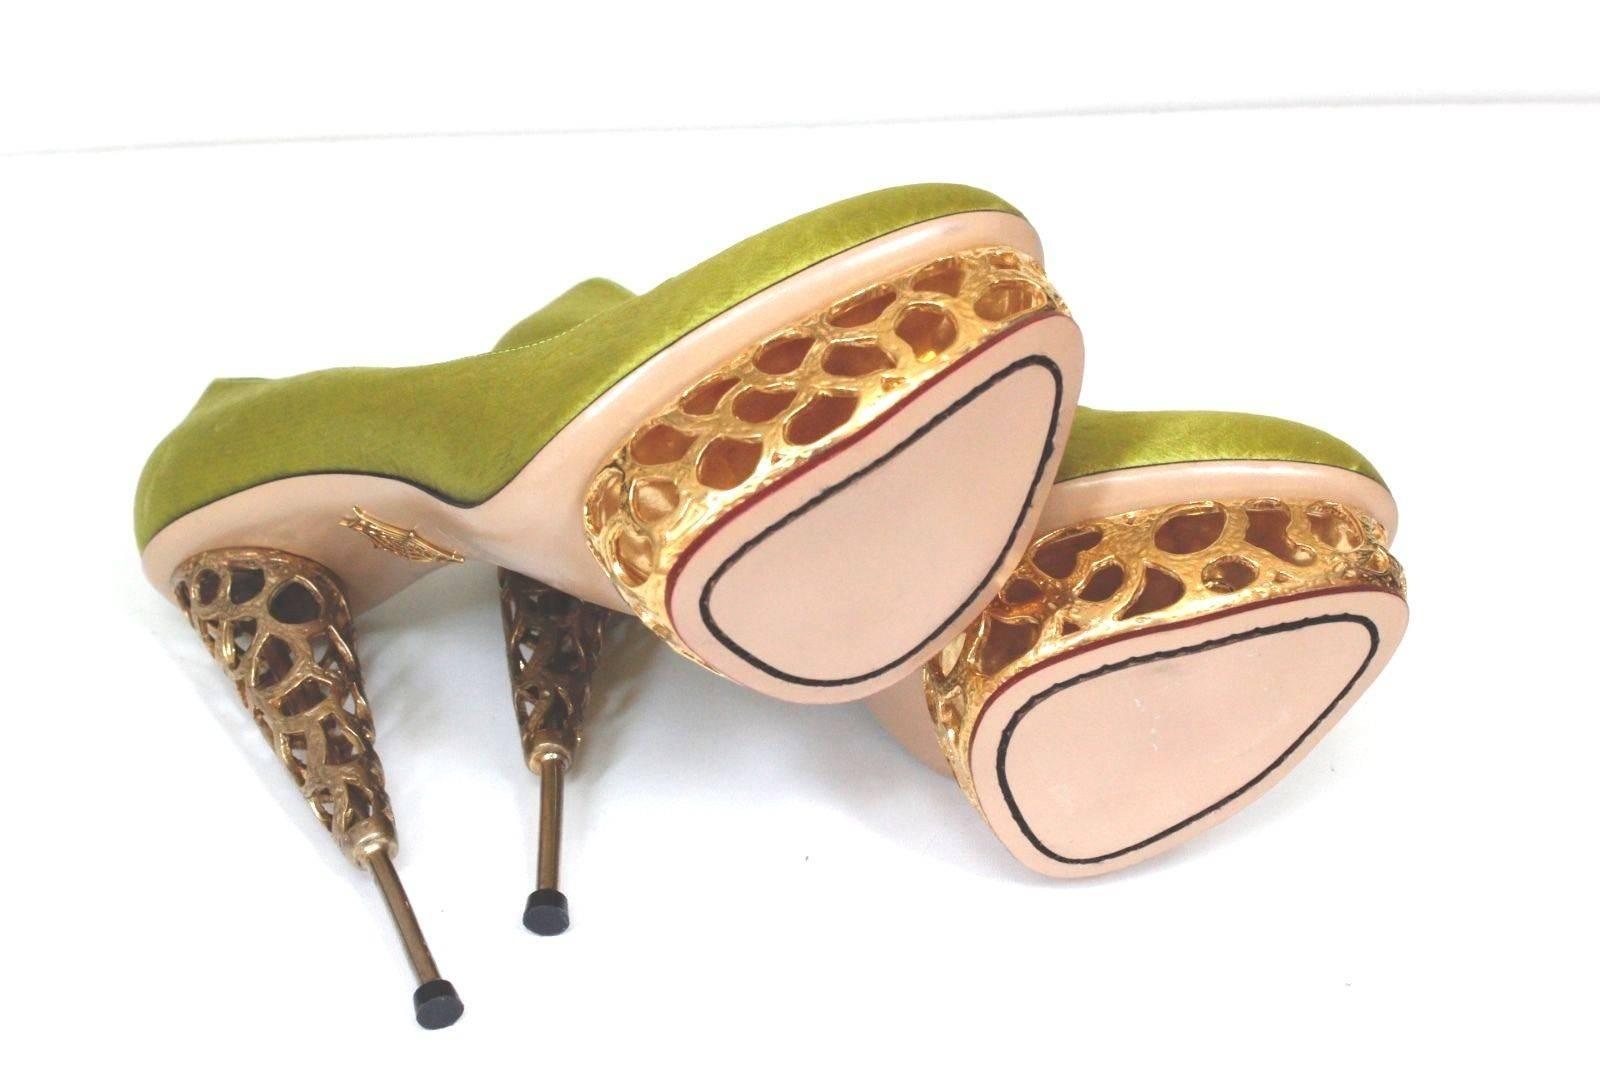 New CHARLOTTE OLYMPIA Chartreuse 'Objets D'Art' pumps 38-39 uk 5-6   In Excellent Condition For Sale In London, GB